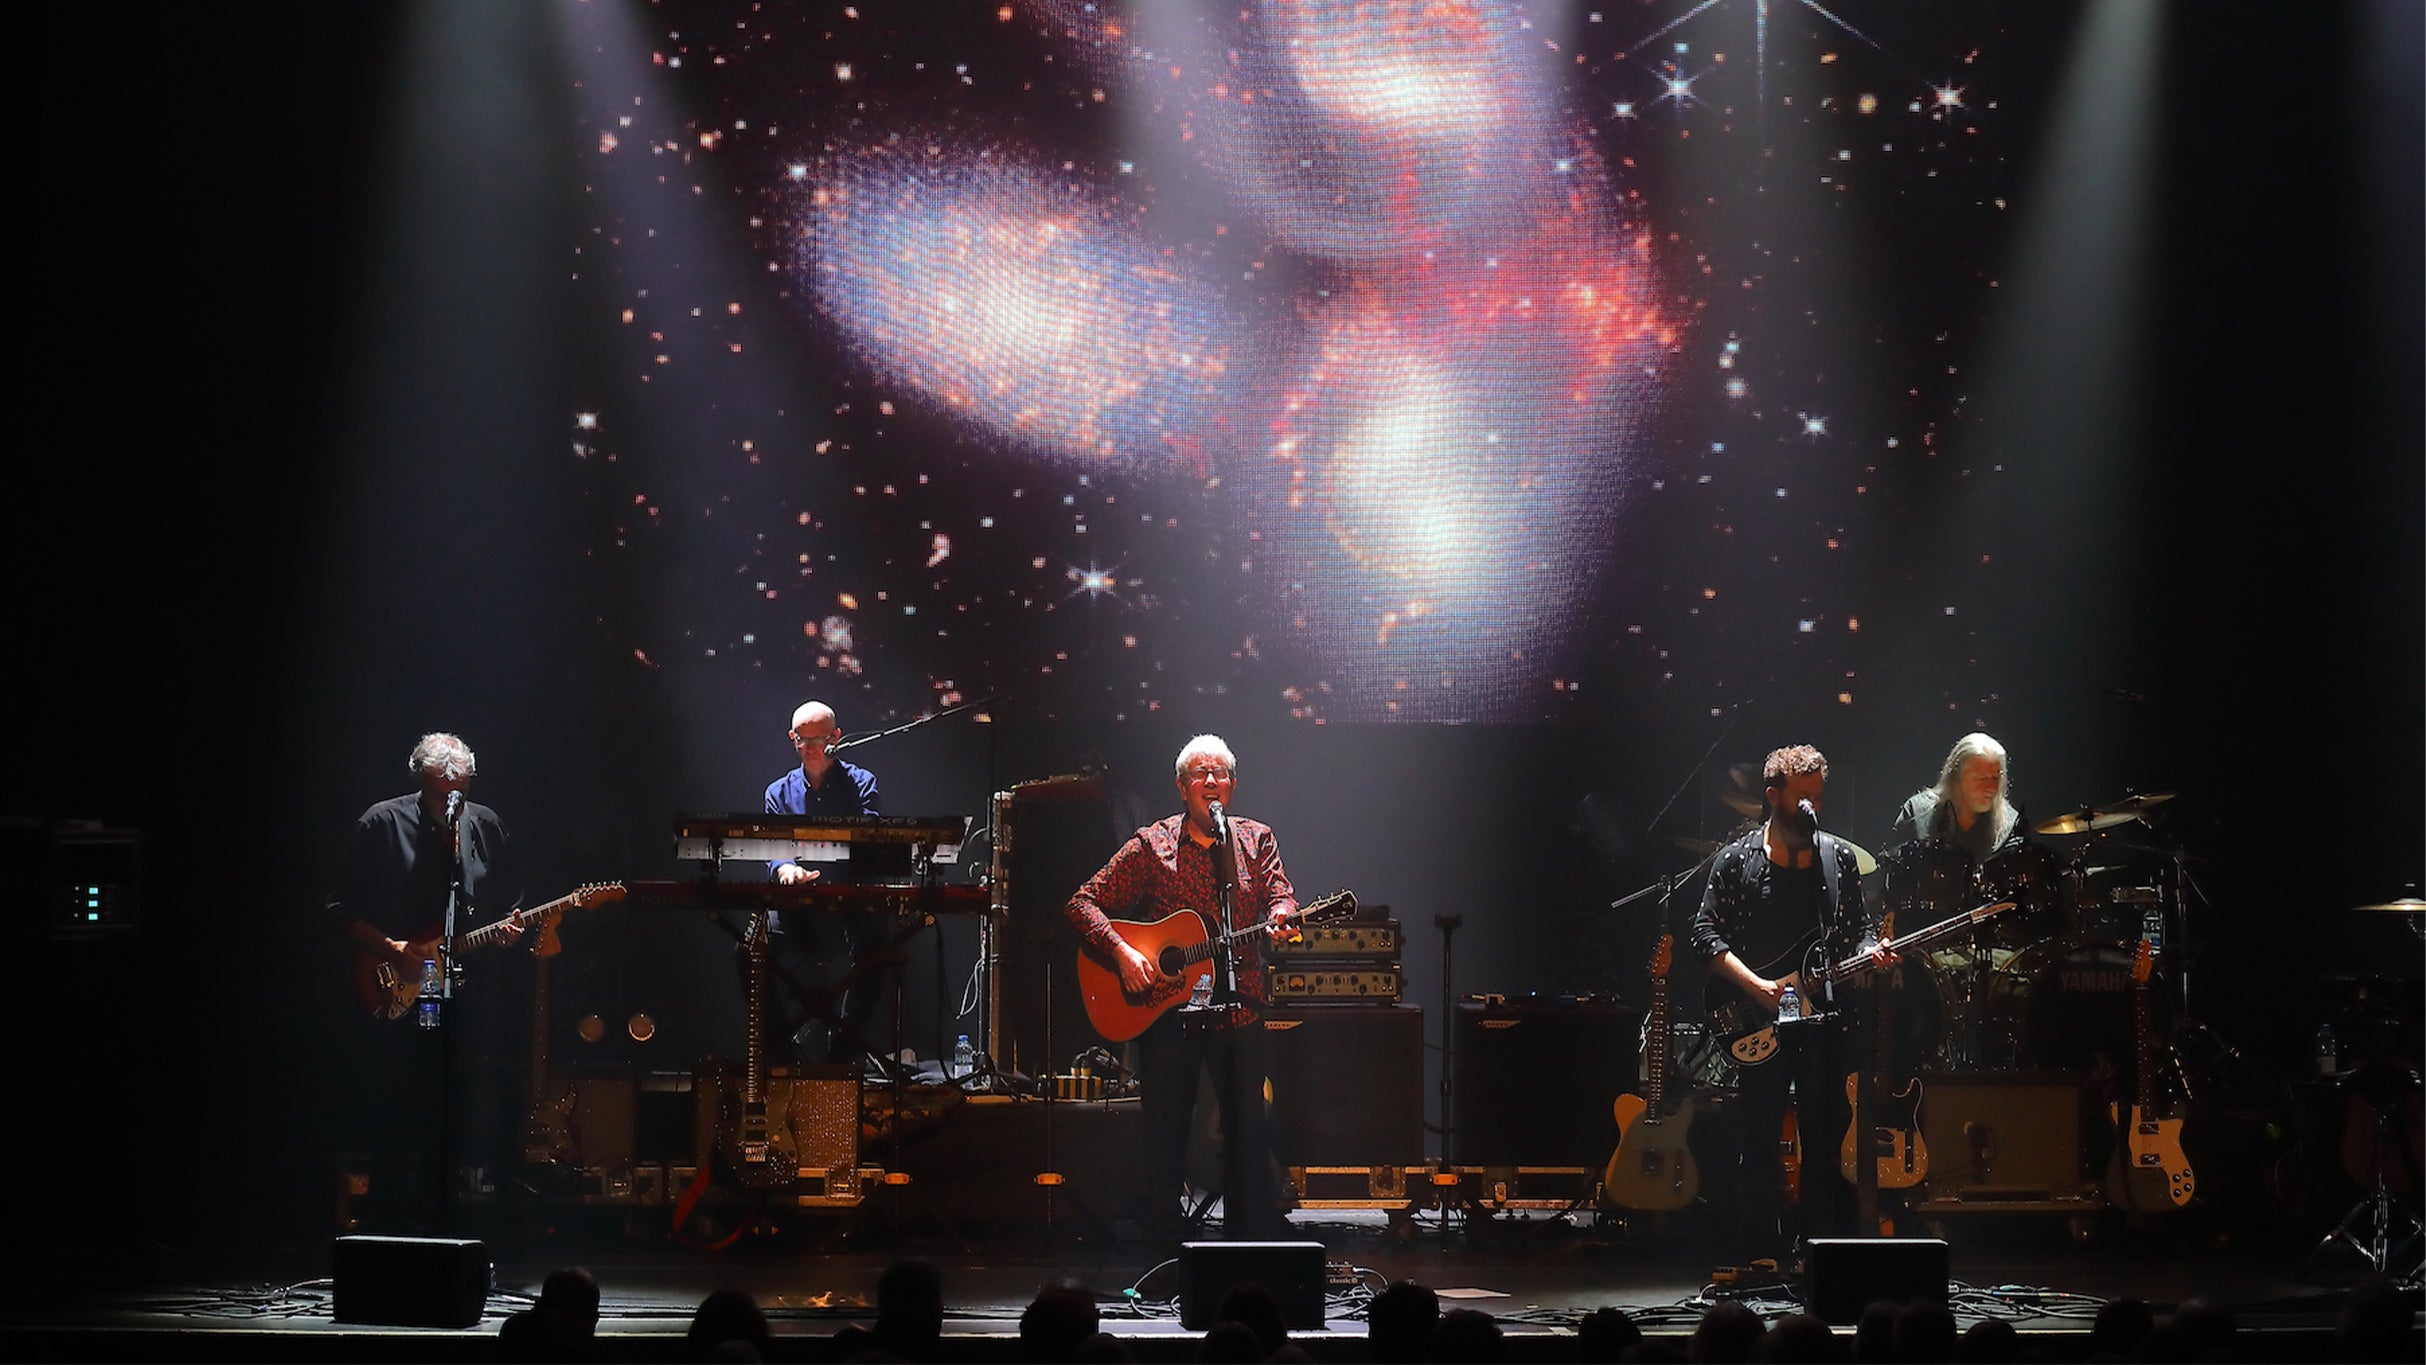 10cc at Pabst Theater